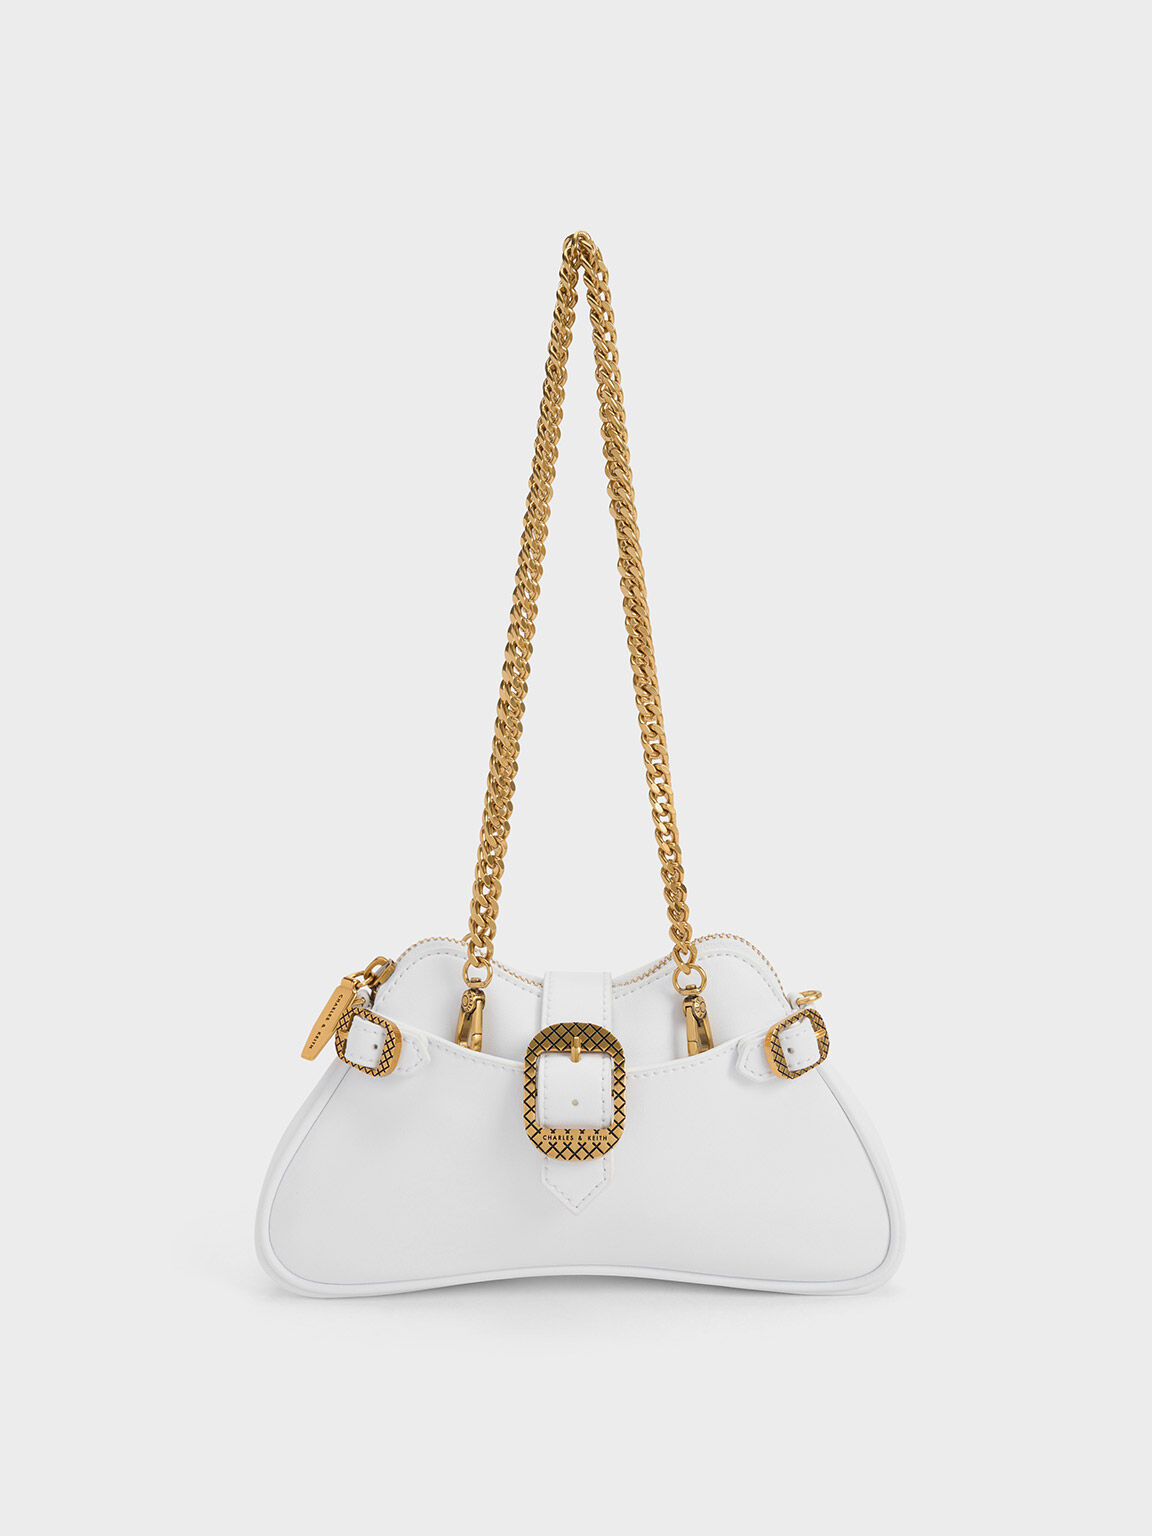 white purse with gold chain  Bags, White purses, Bags designer